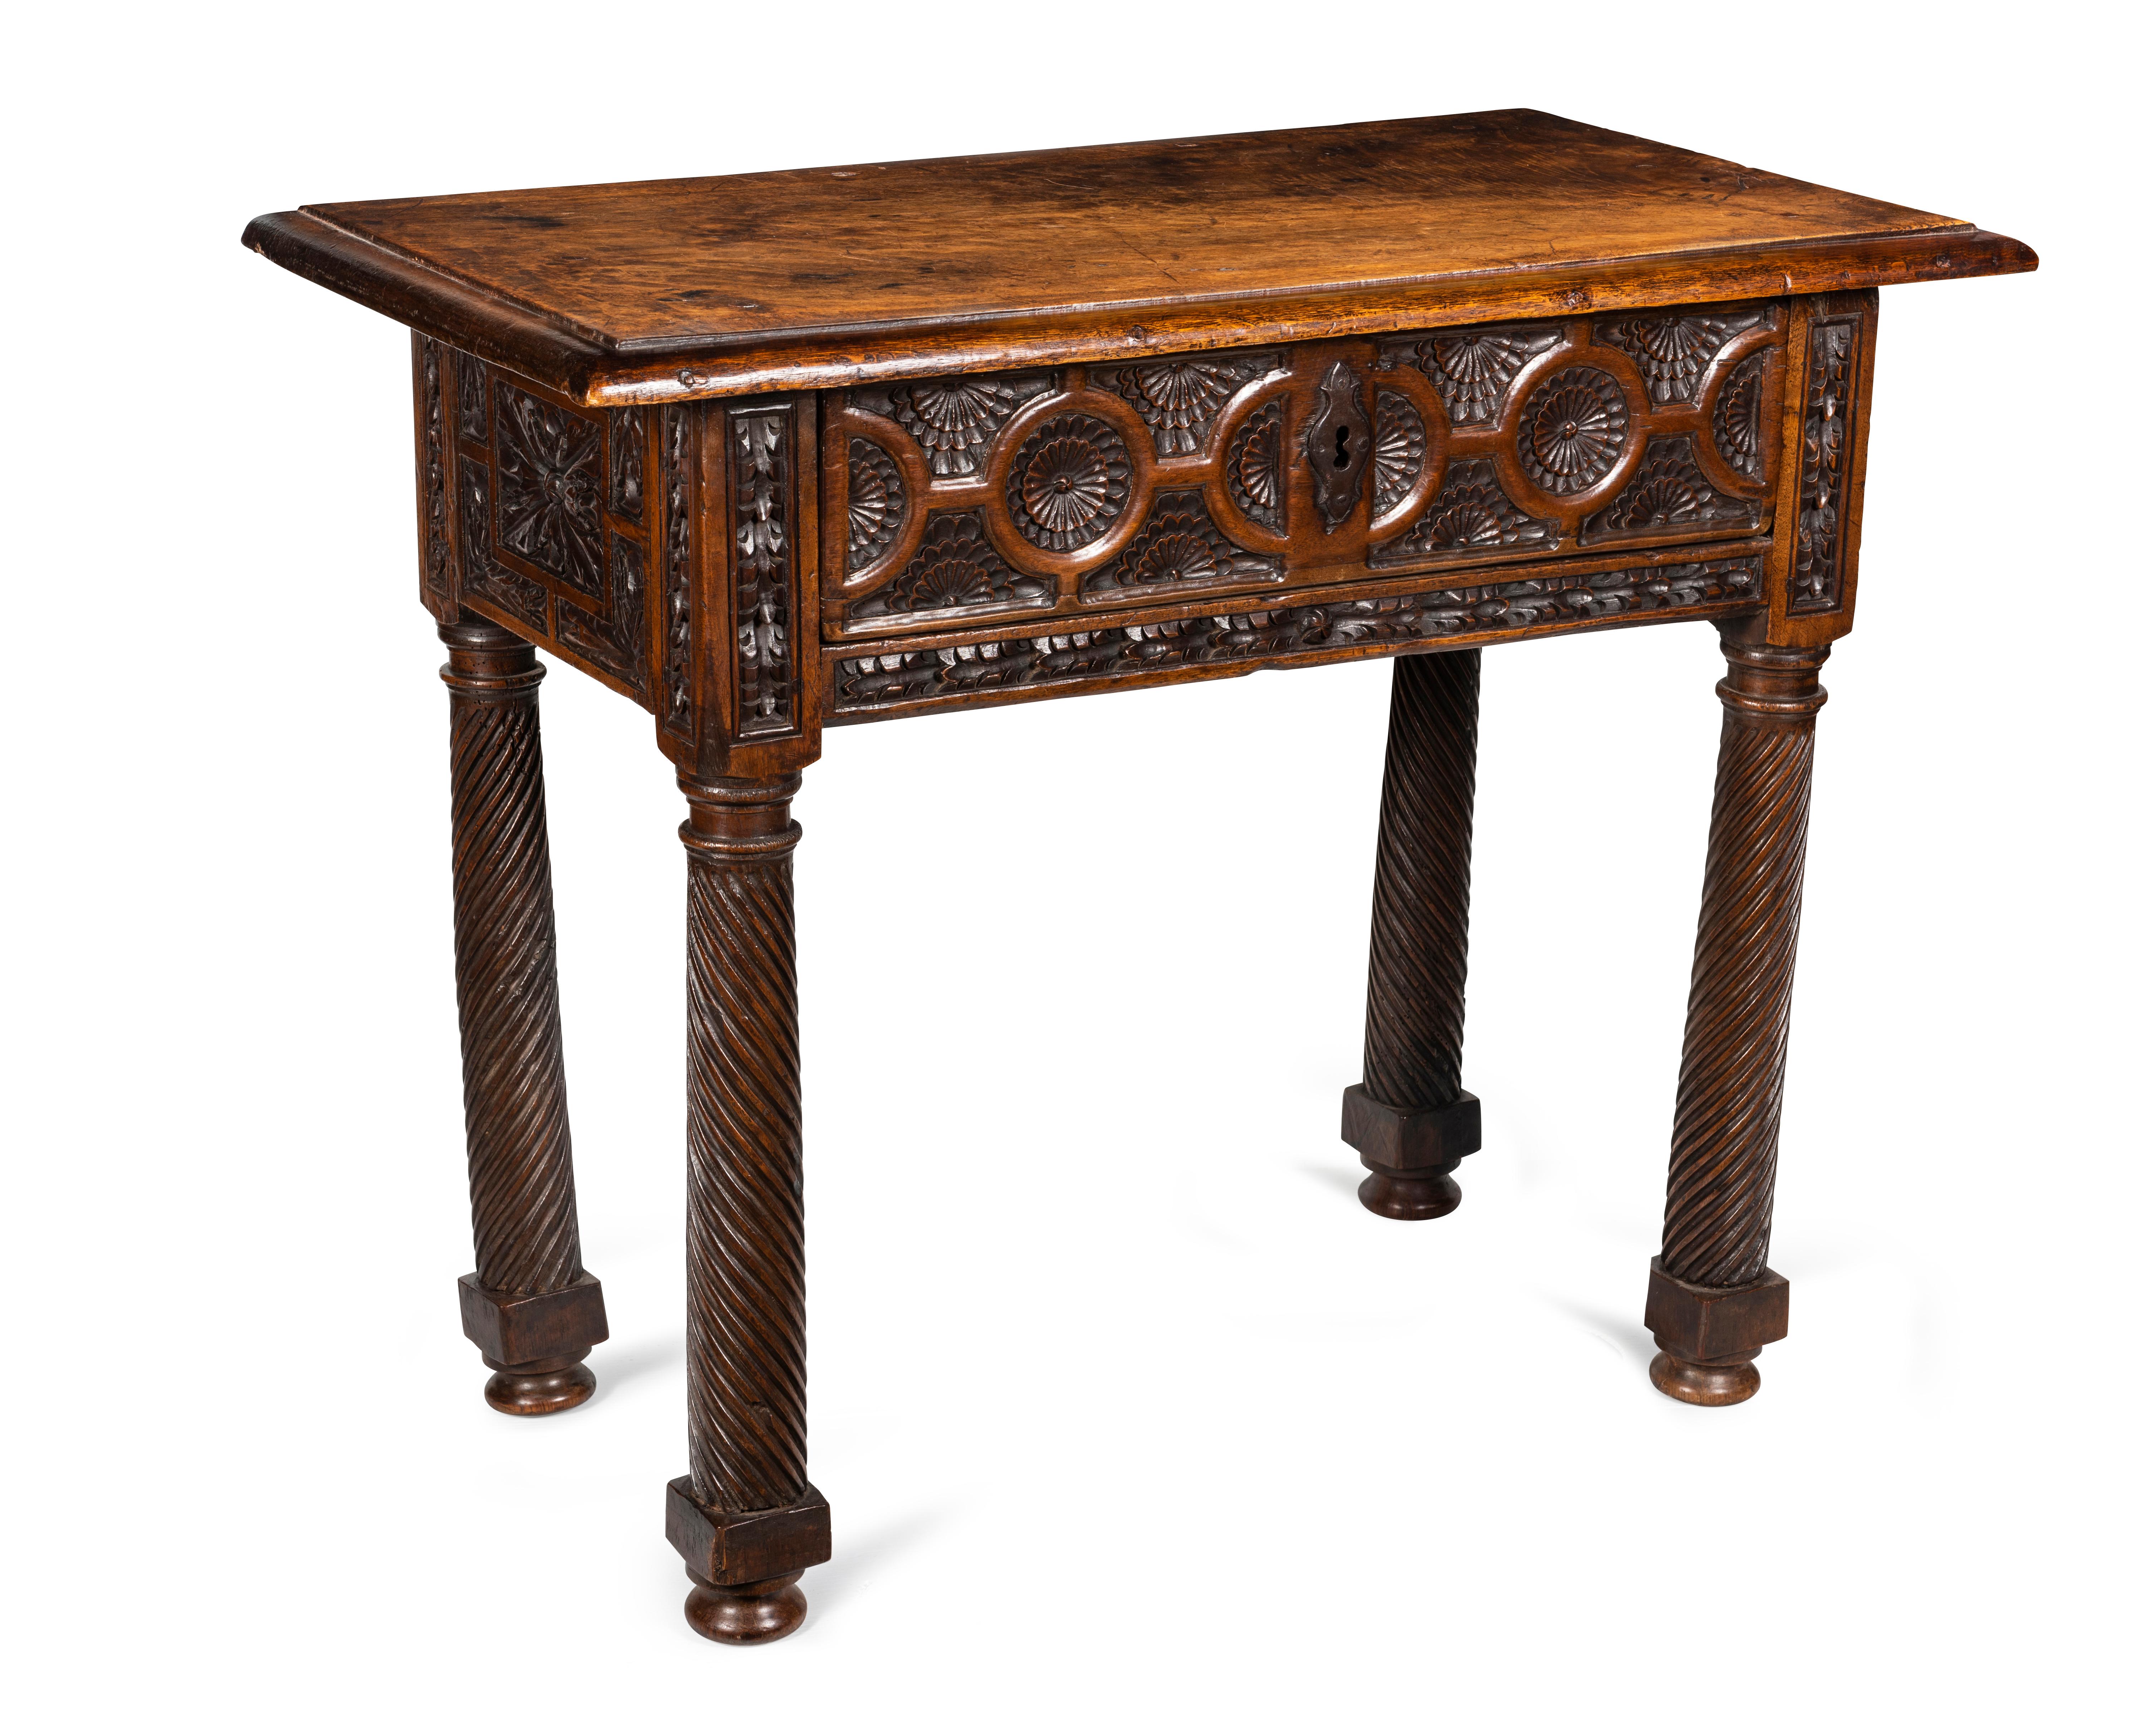 The single plank top with ovolo moulded edge over recessed single drawer with carved stylised rosettes and rings, centred with iron cartouche shaped escutcheon and flanked by leaf carved standards, continuing to side frieze carved with leaf and